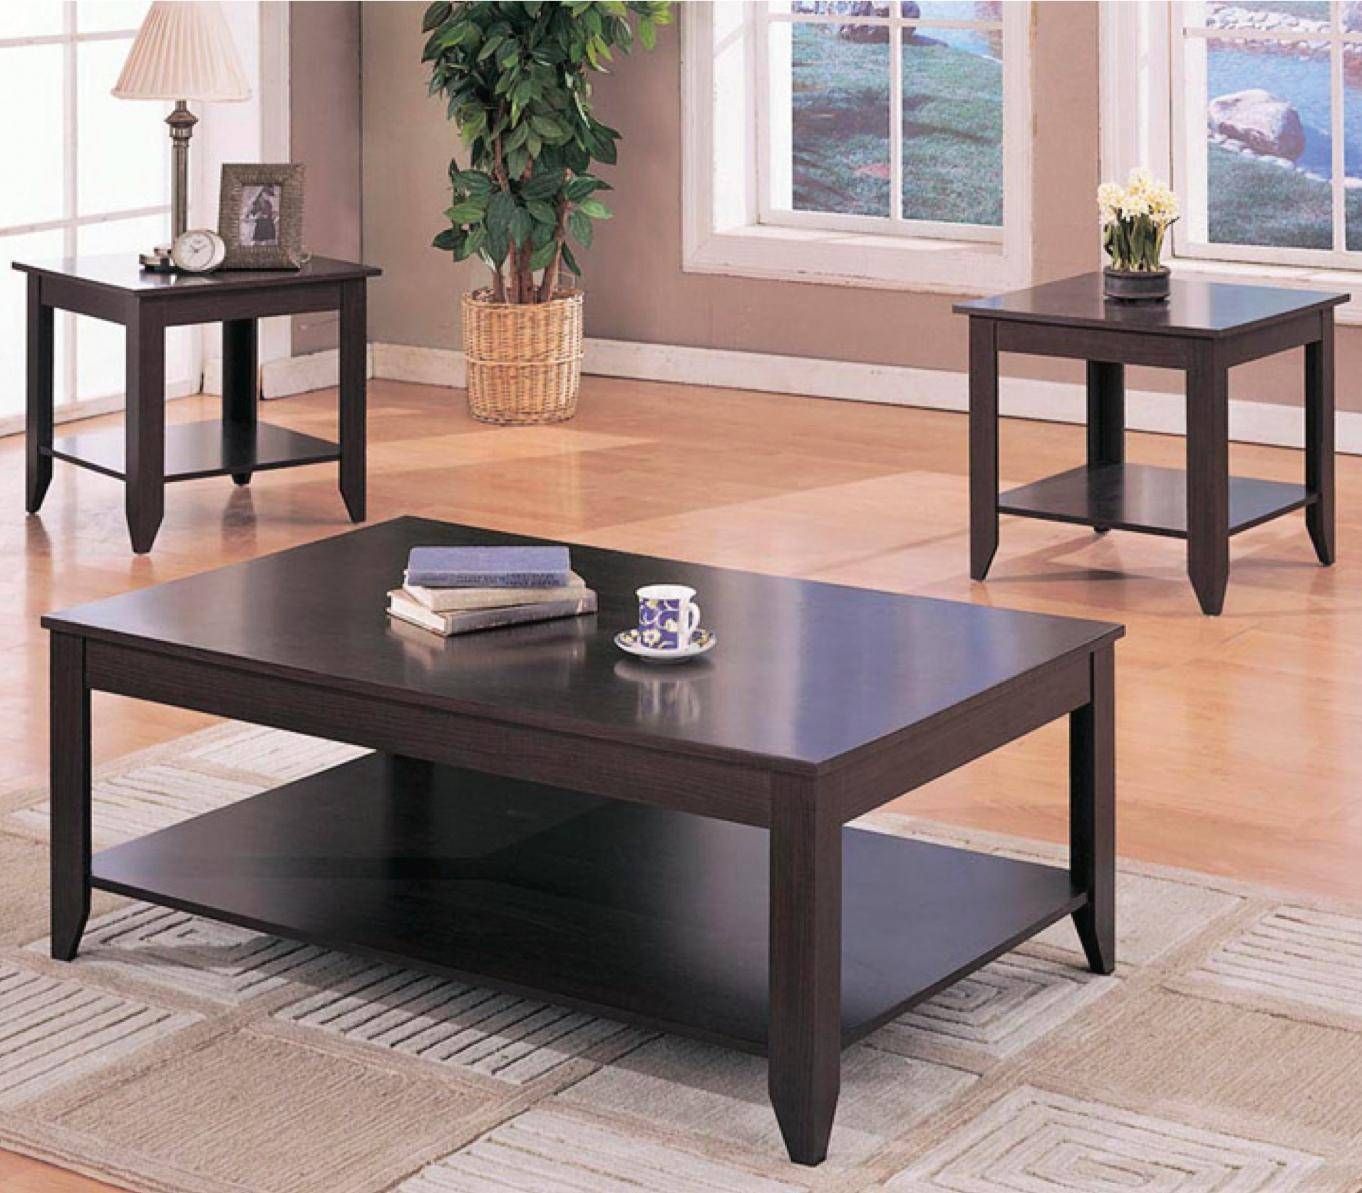 Wood Coffee Table And End Table Sets | Coffee Tables Decoration Regarding Contemporary Coffee Table Sets (View 20 of 30)